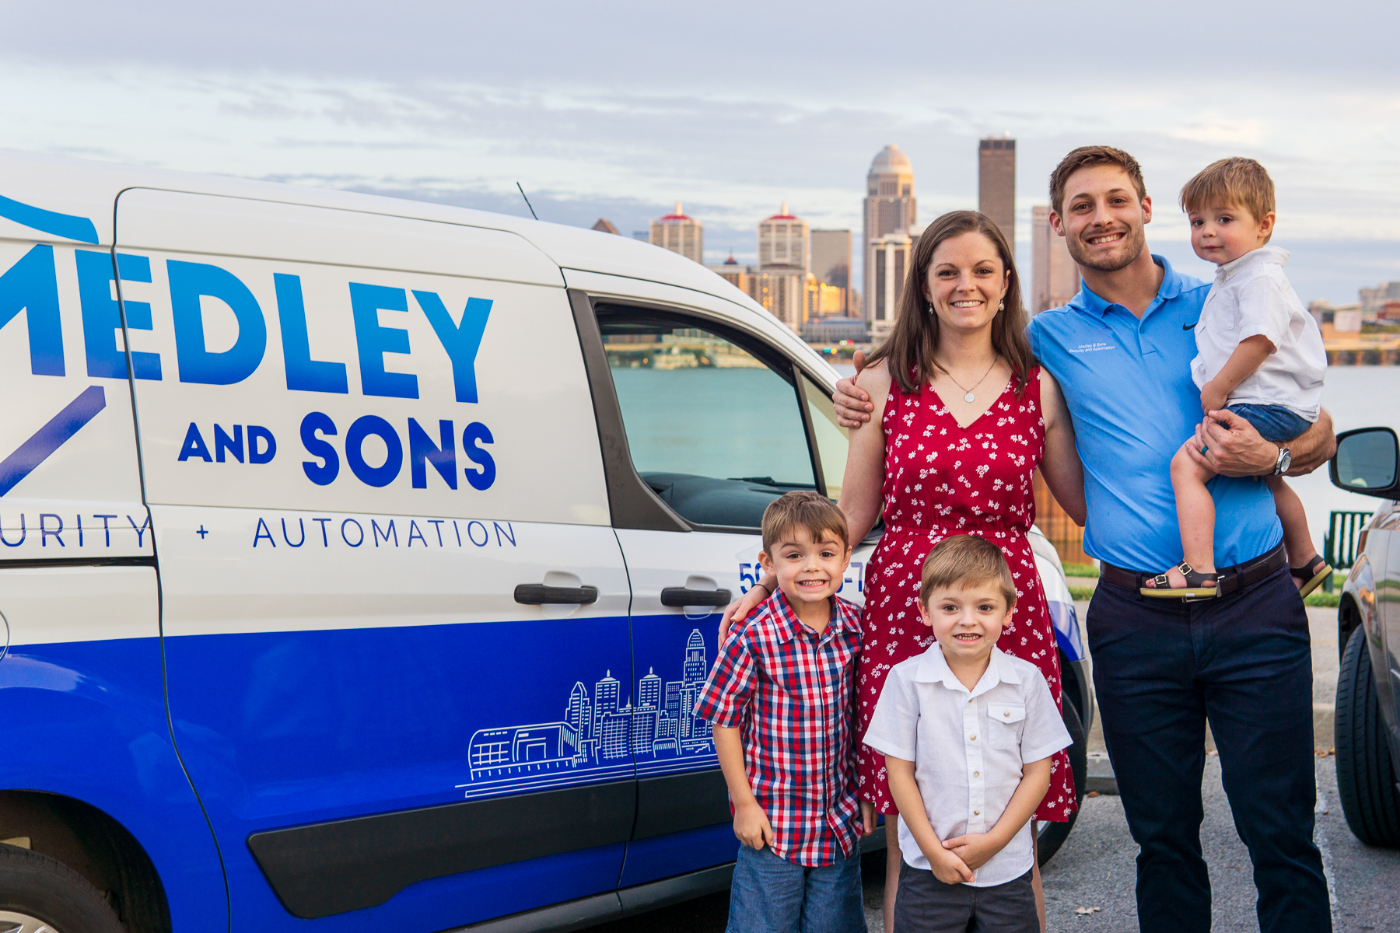 Medley & Sons Family with Louisville KY Skyline behind